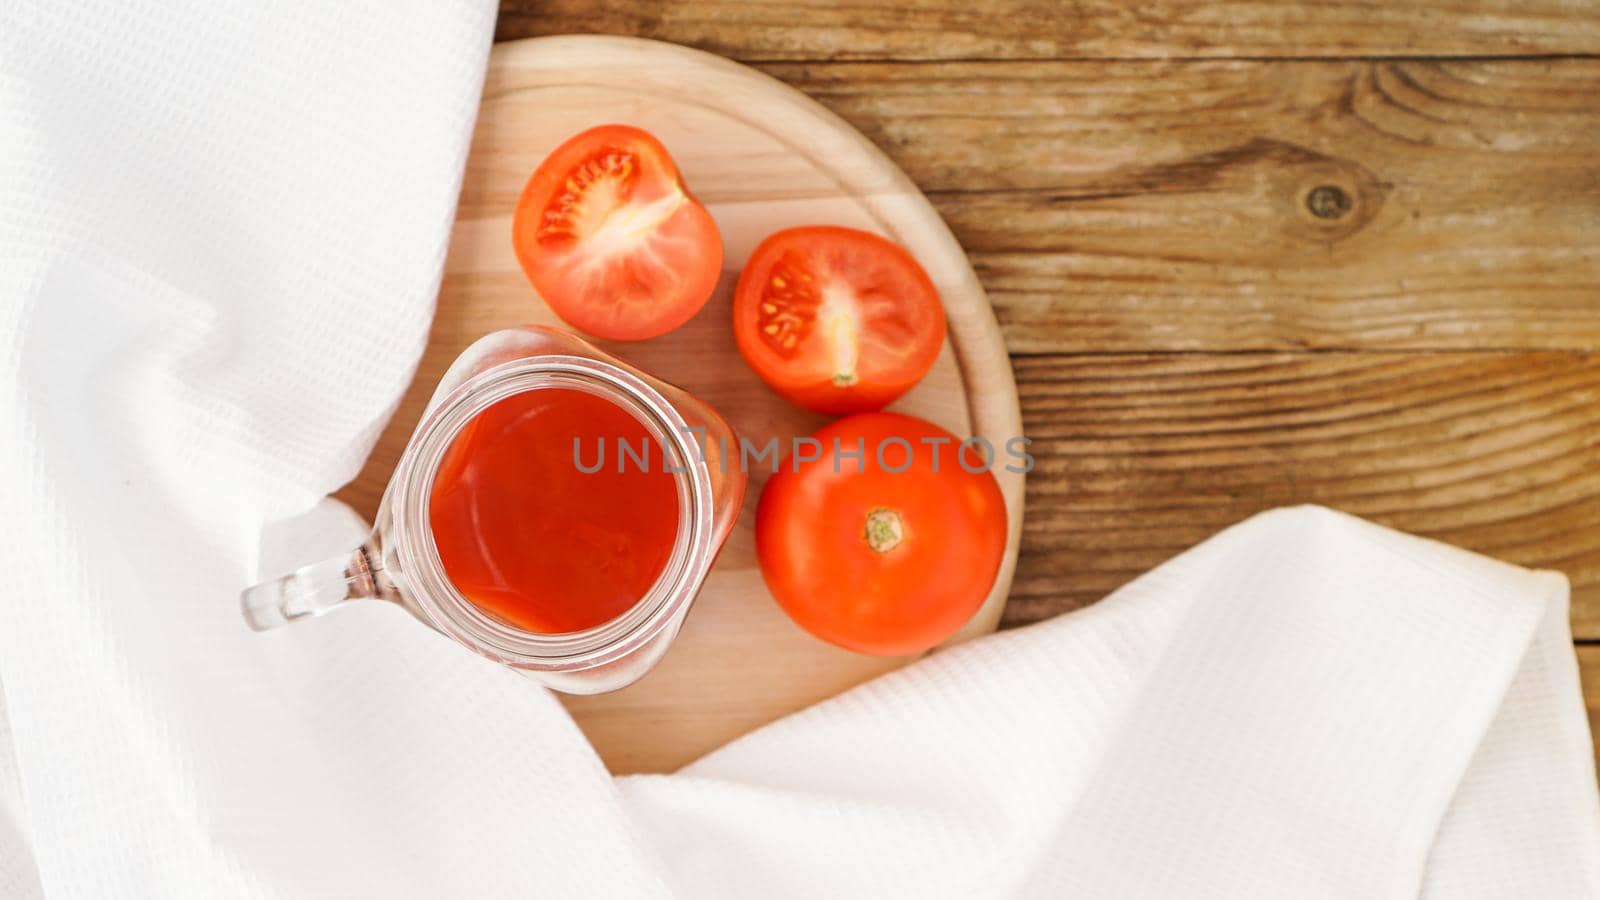 Tomato juice in glass jar and fresh tomatoes on wooden background by natali_brill